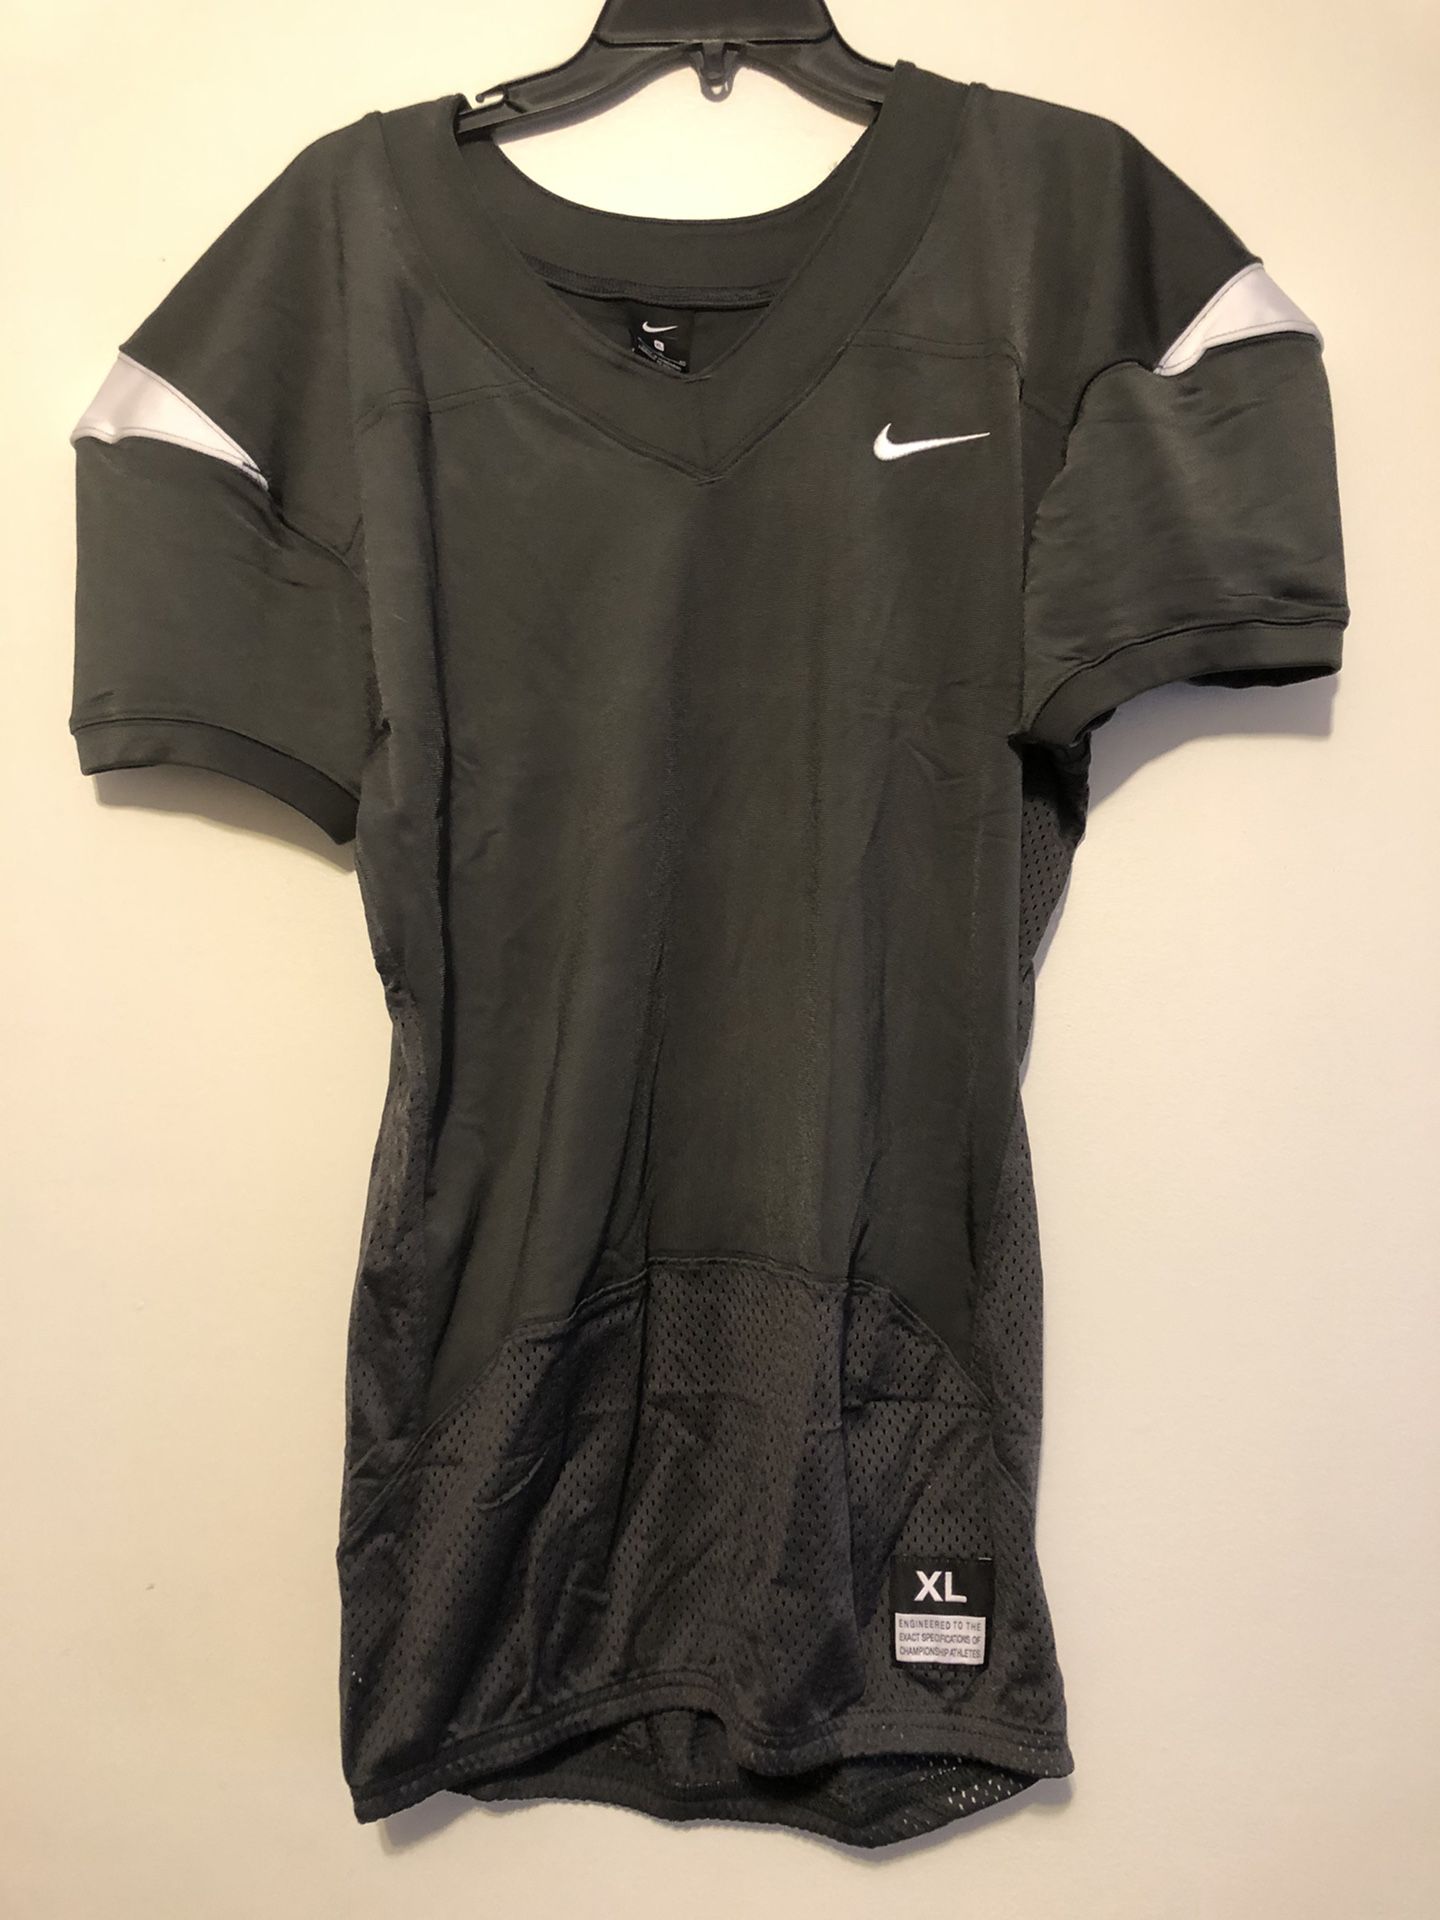 Nike Blank Football Jersey Size L and XL Available